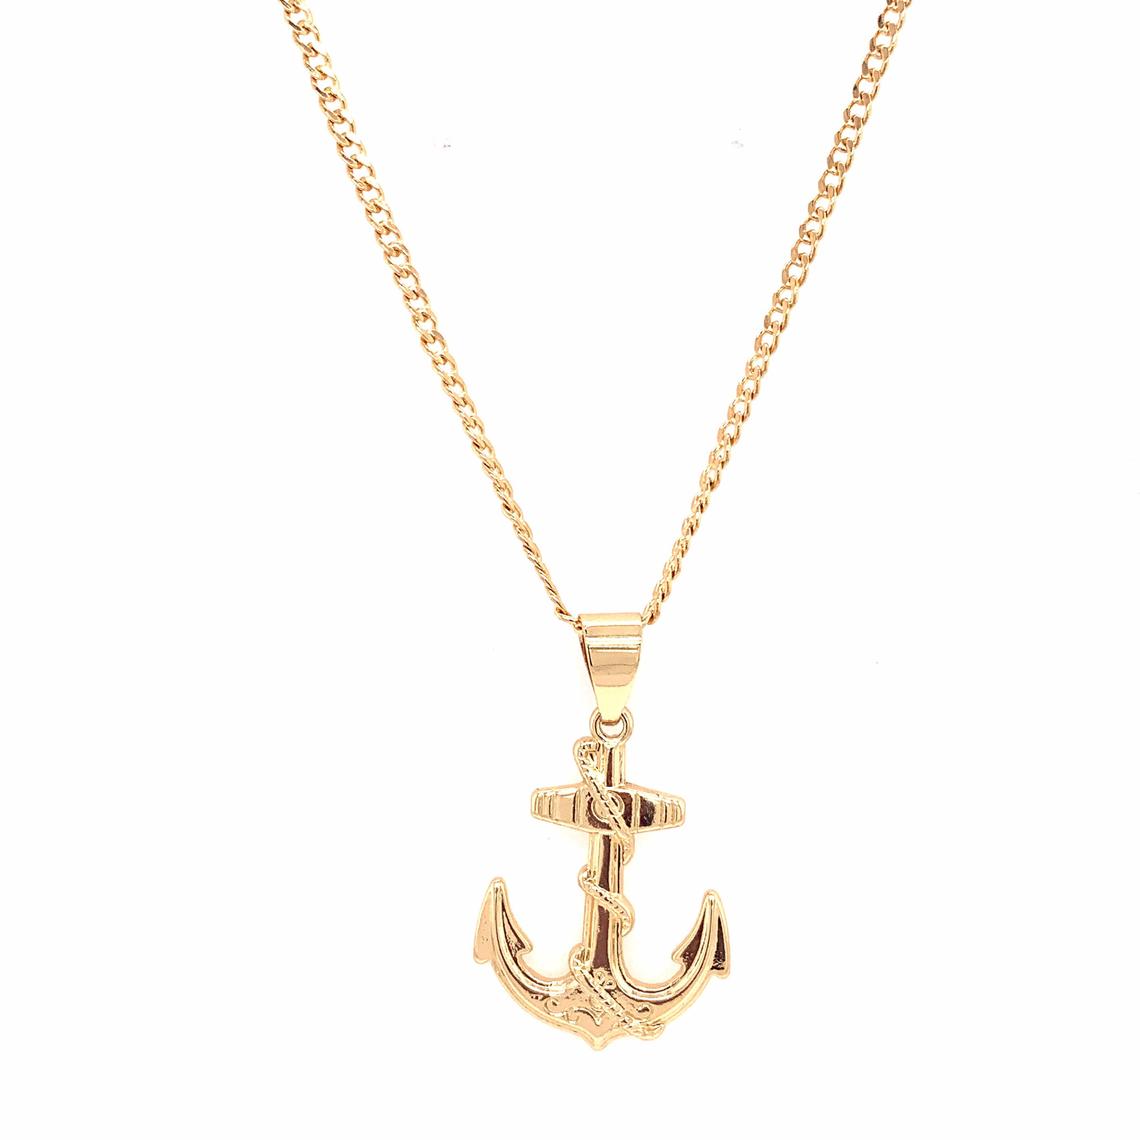 Beautiful Gold Anchor Necklace